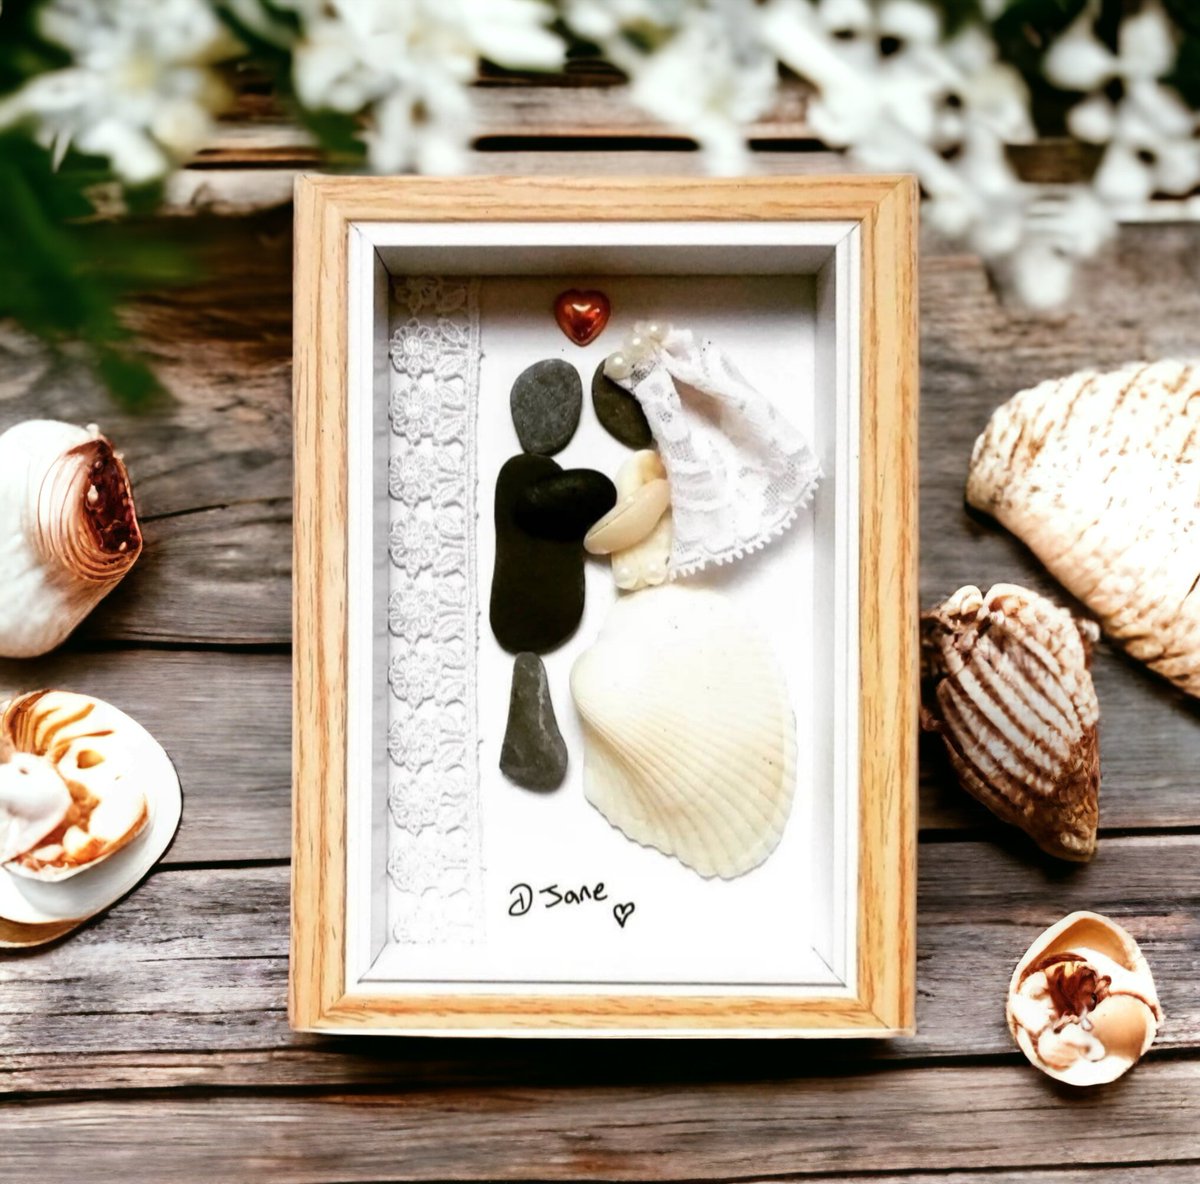 I have lots of these beautiful pebble & shell framed box art pics to add to my shop x 💙👰#craftmakersuk #TheCraftersUk #SmartSocial #getthatgift #UKGiftAM #handmadeinbritain #BizBubble #networkwiththrive #UKGiftHour #bizhour #Craftsuk #craftbizparty  #womaninbizhour #inbizhour